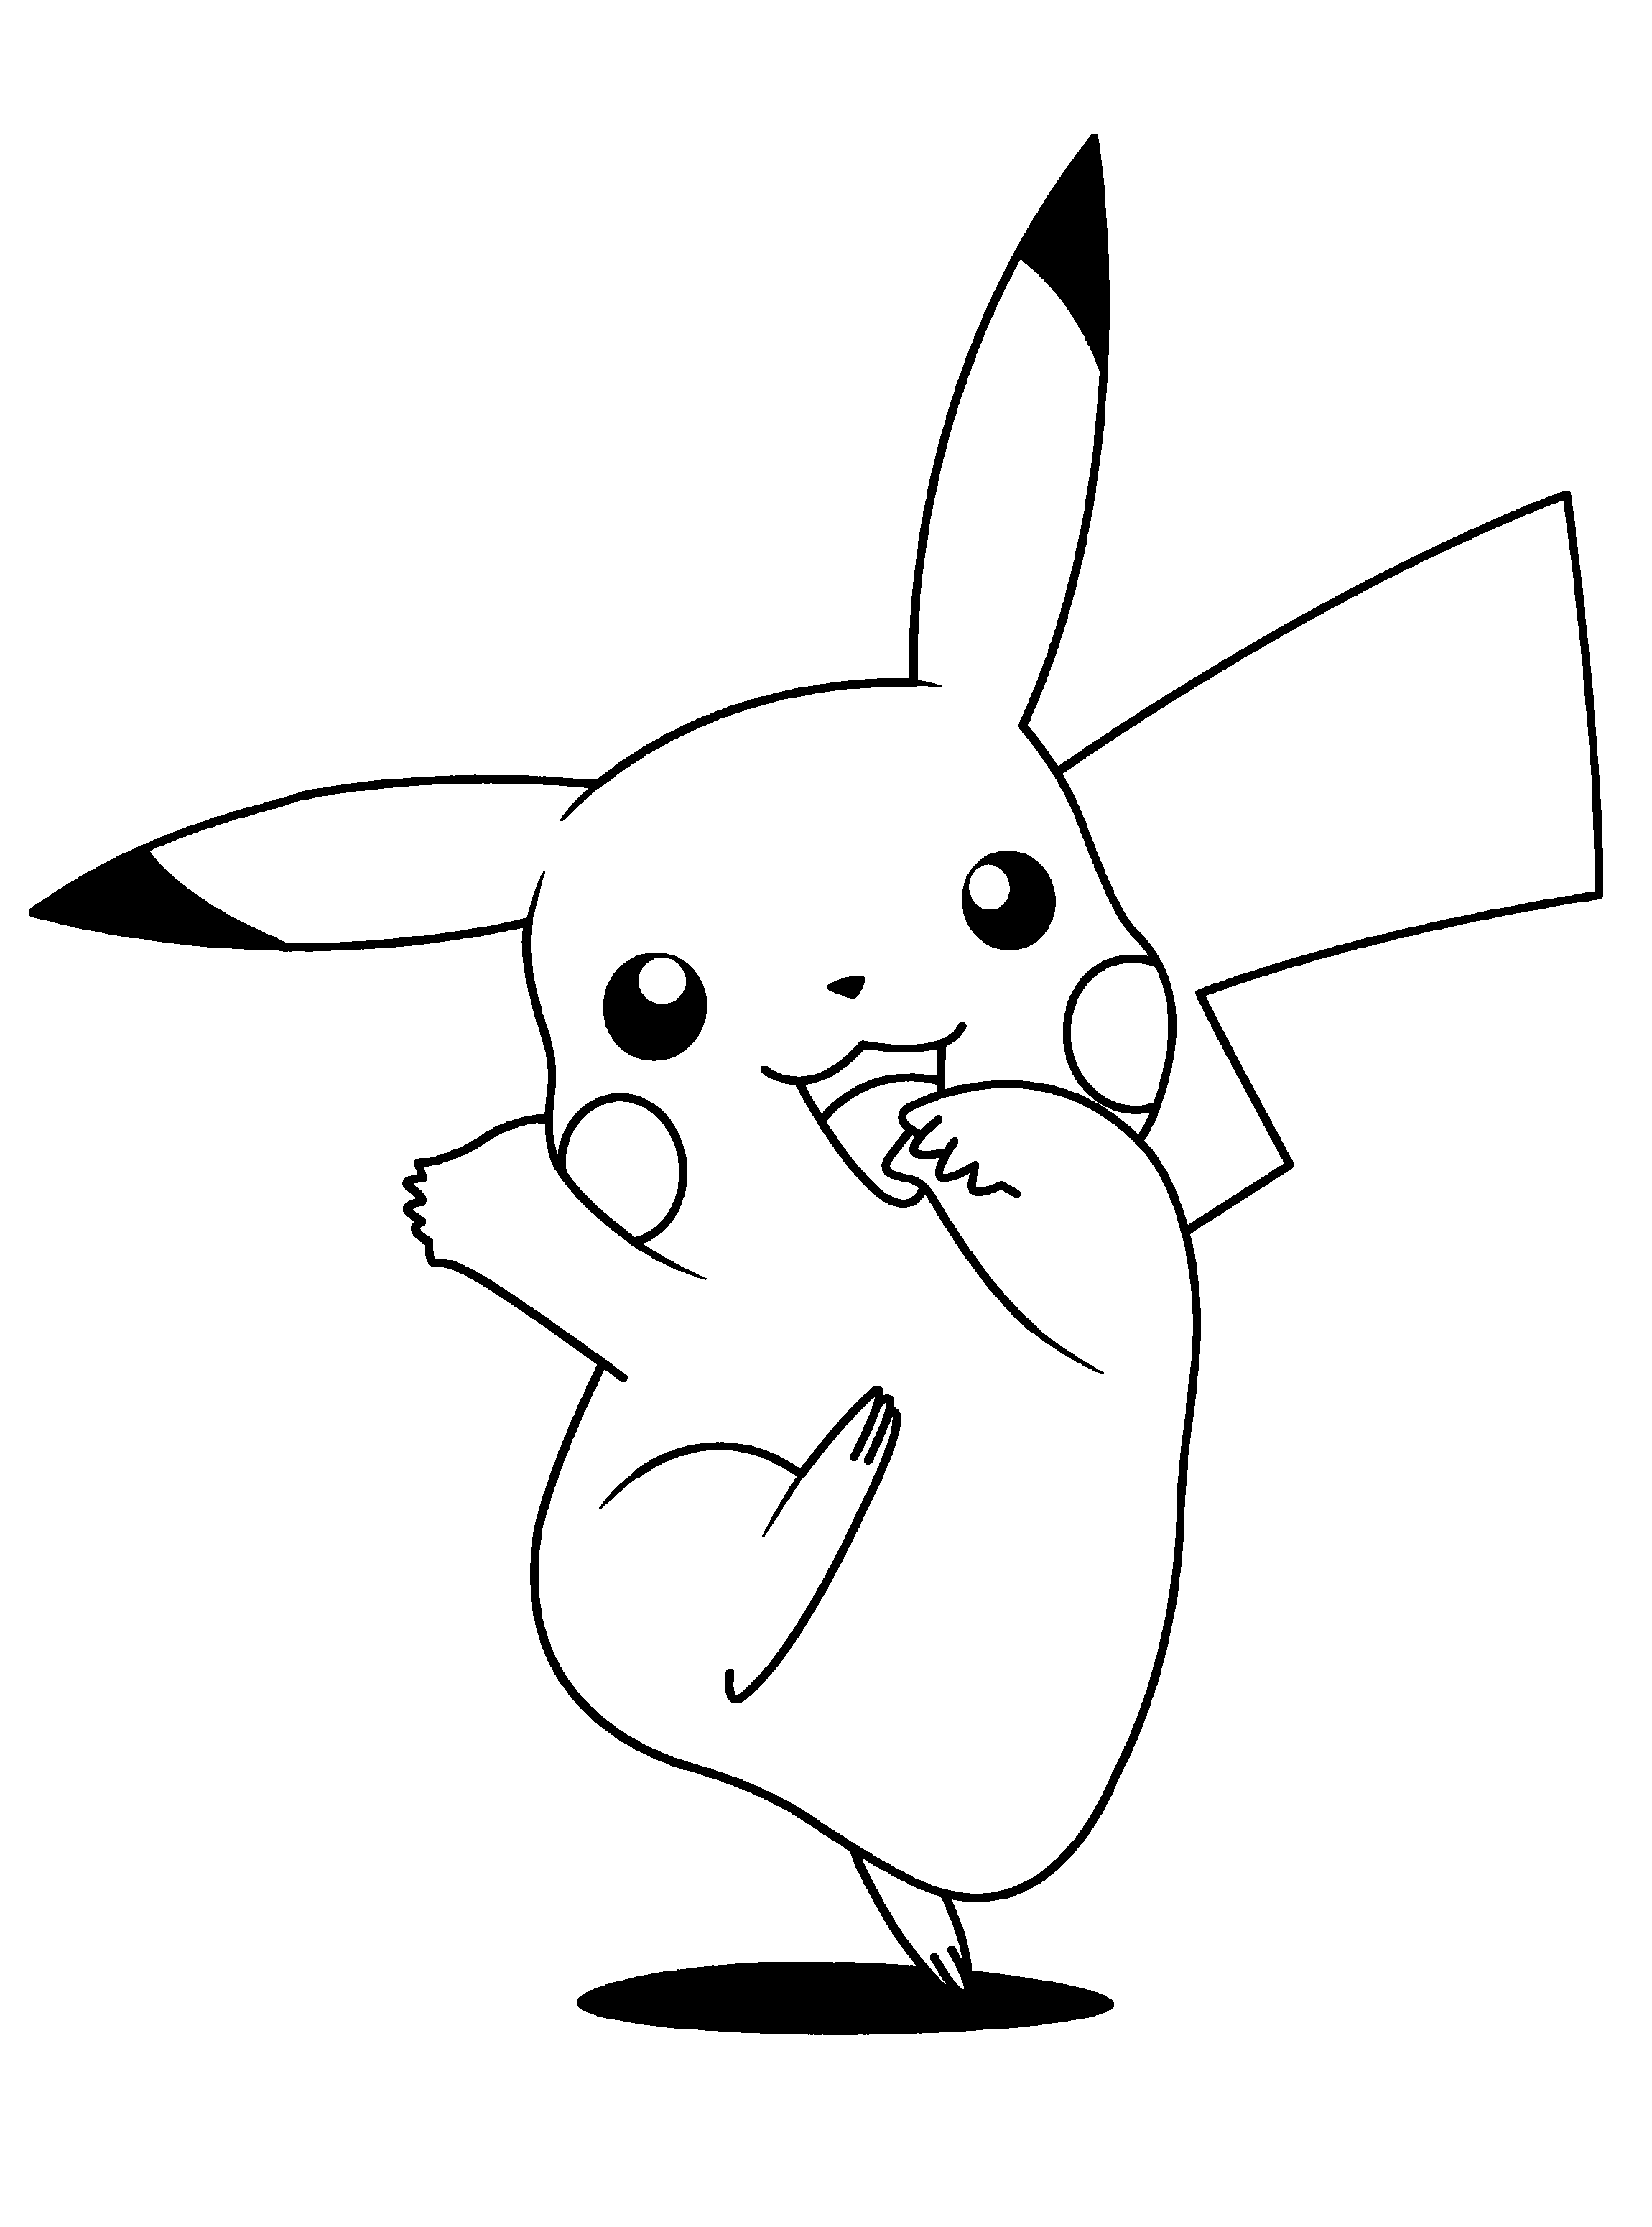 Pokemon coloring pages | Kids coloring pages | #39